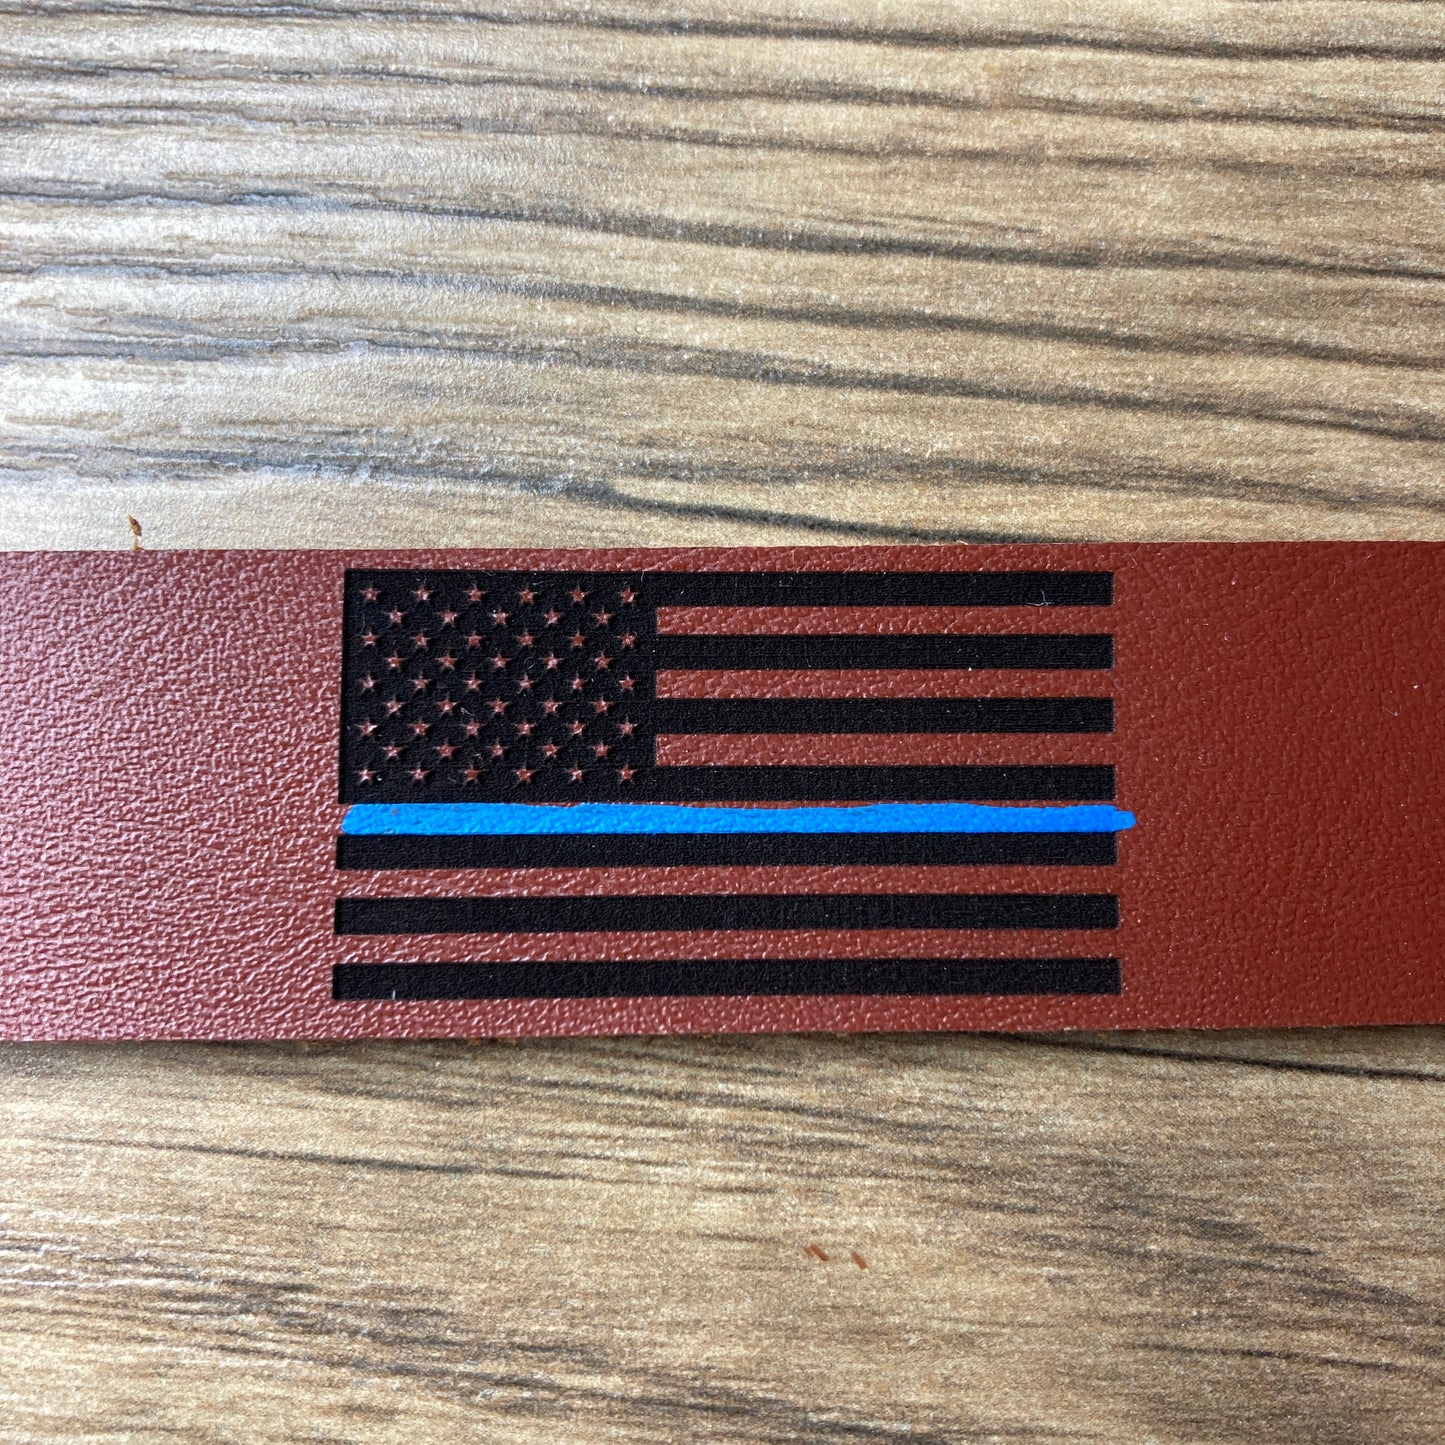 Thin Blue Line Leather Keychain